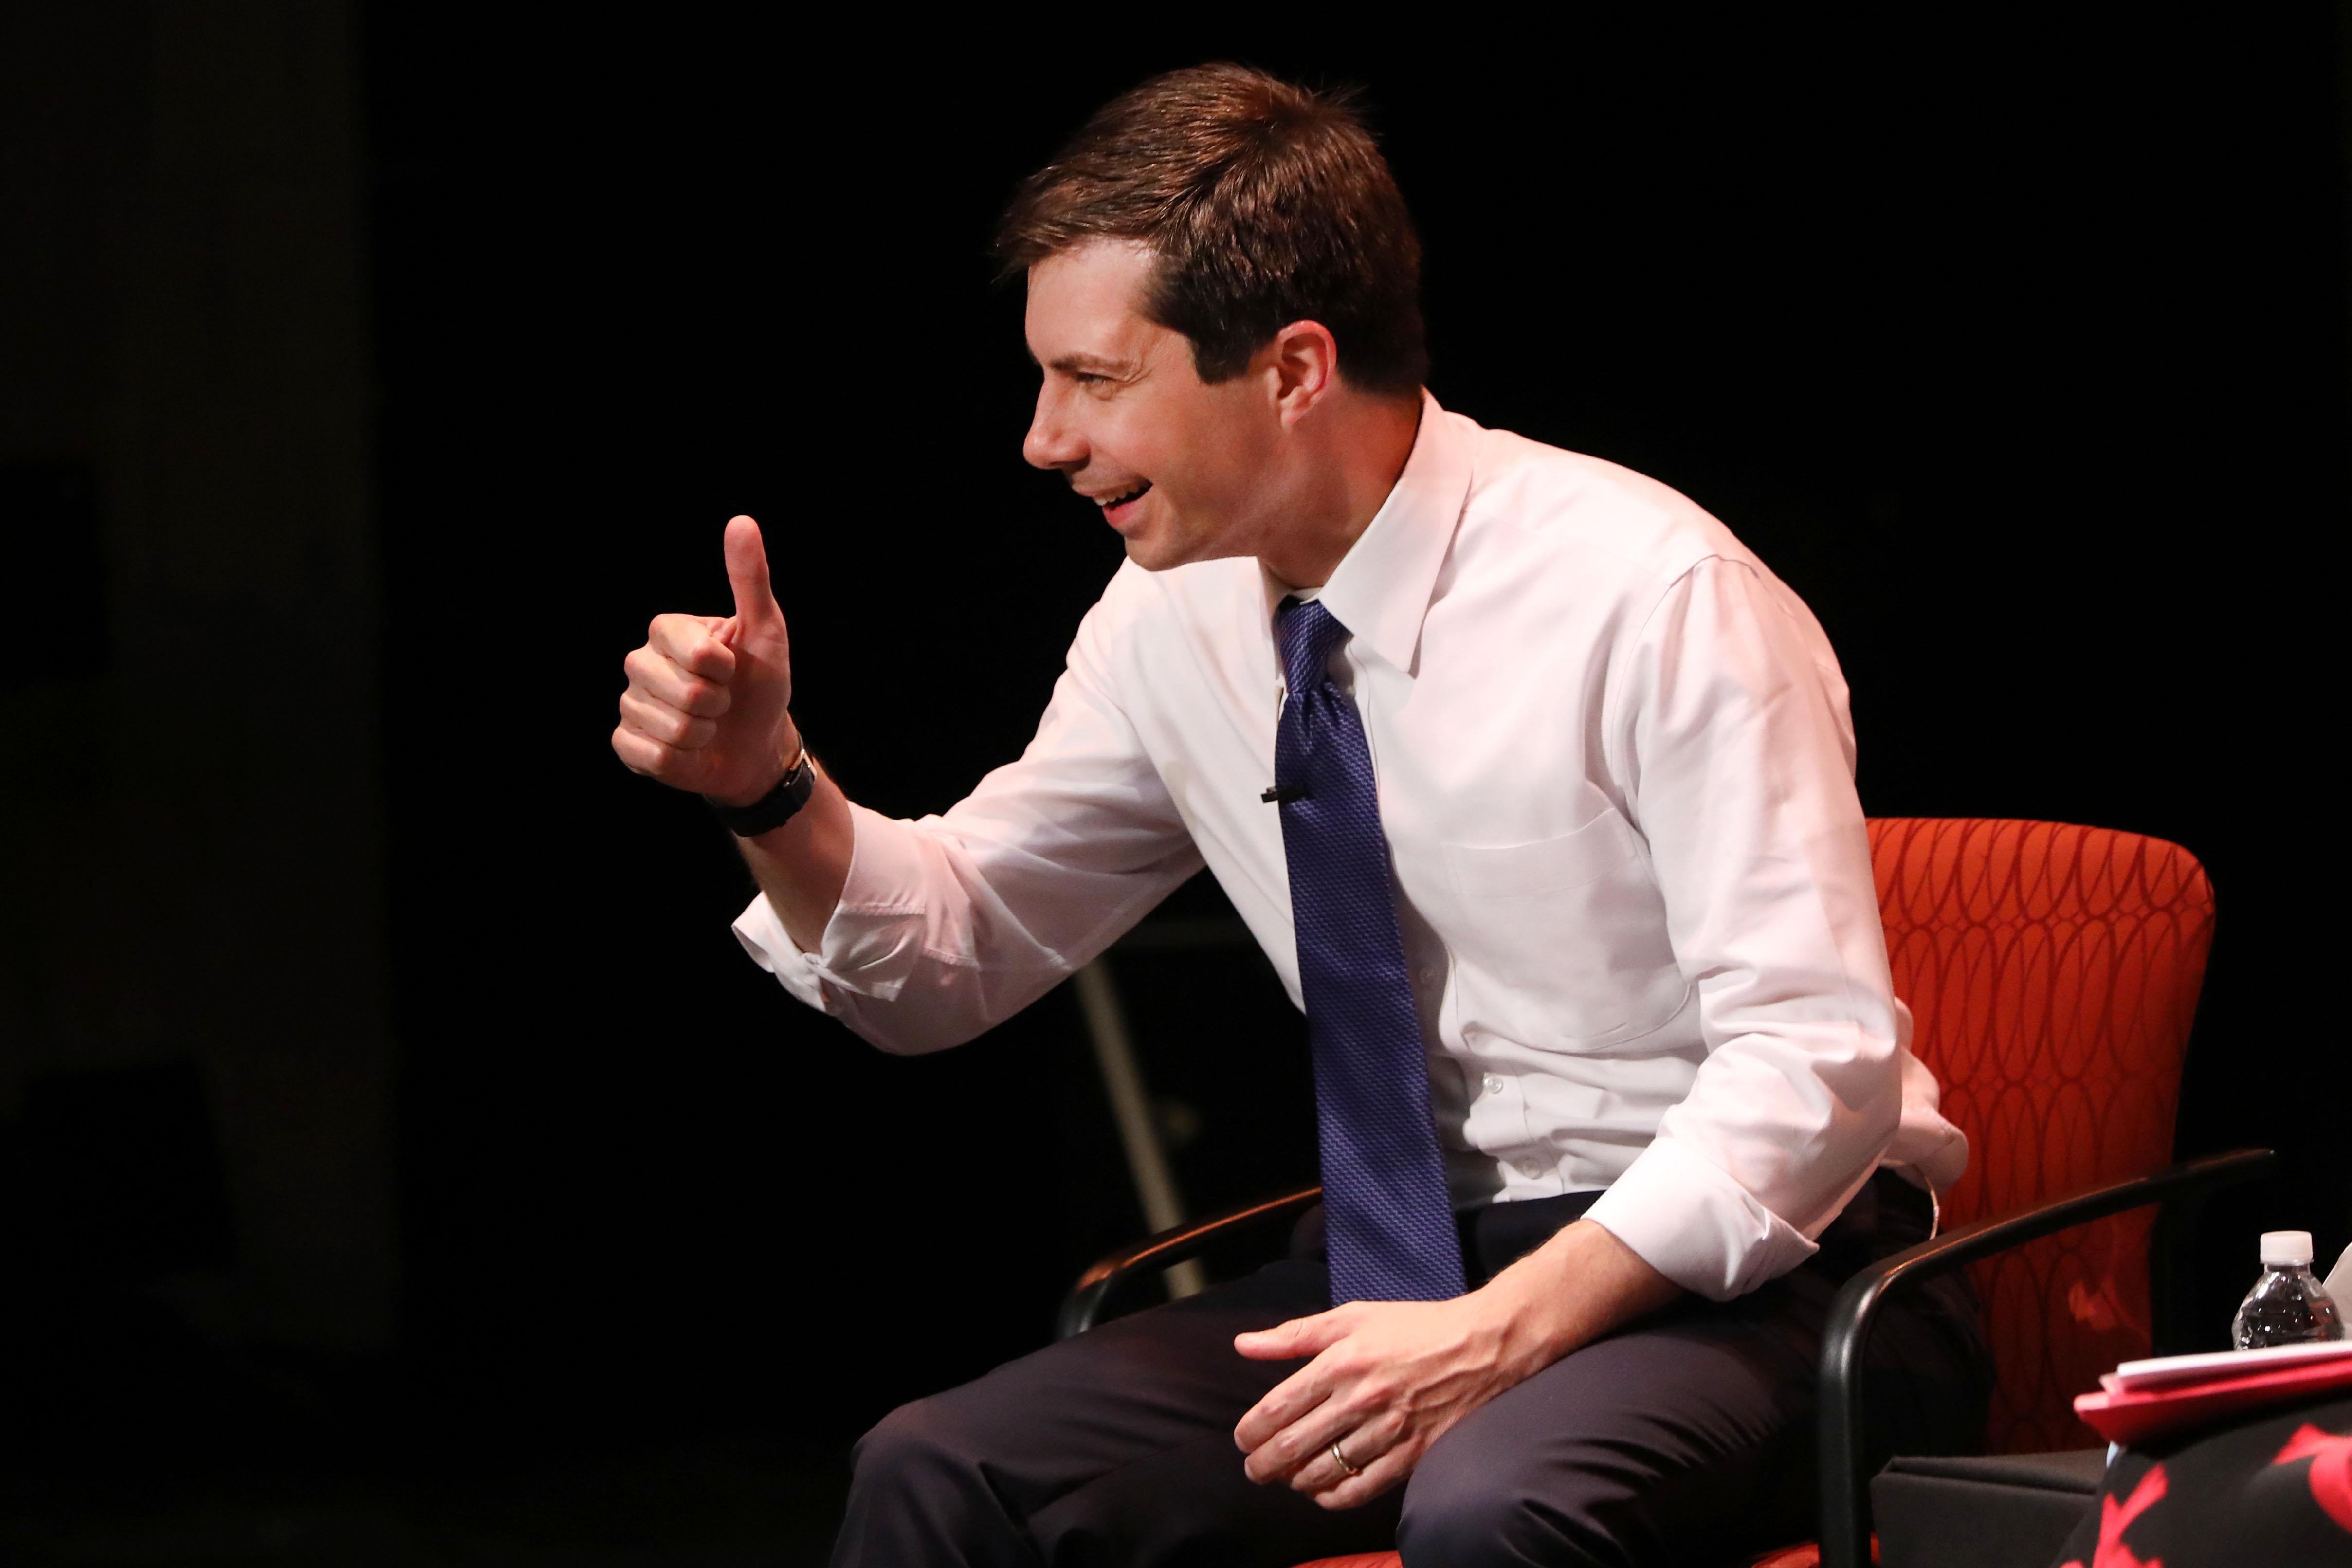 Democratic presidential hopeful Mayor Pete Buttigieg participates in a talk at LaGuardia Community College on May 22, 2019 in New York City. 